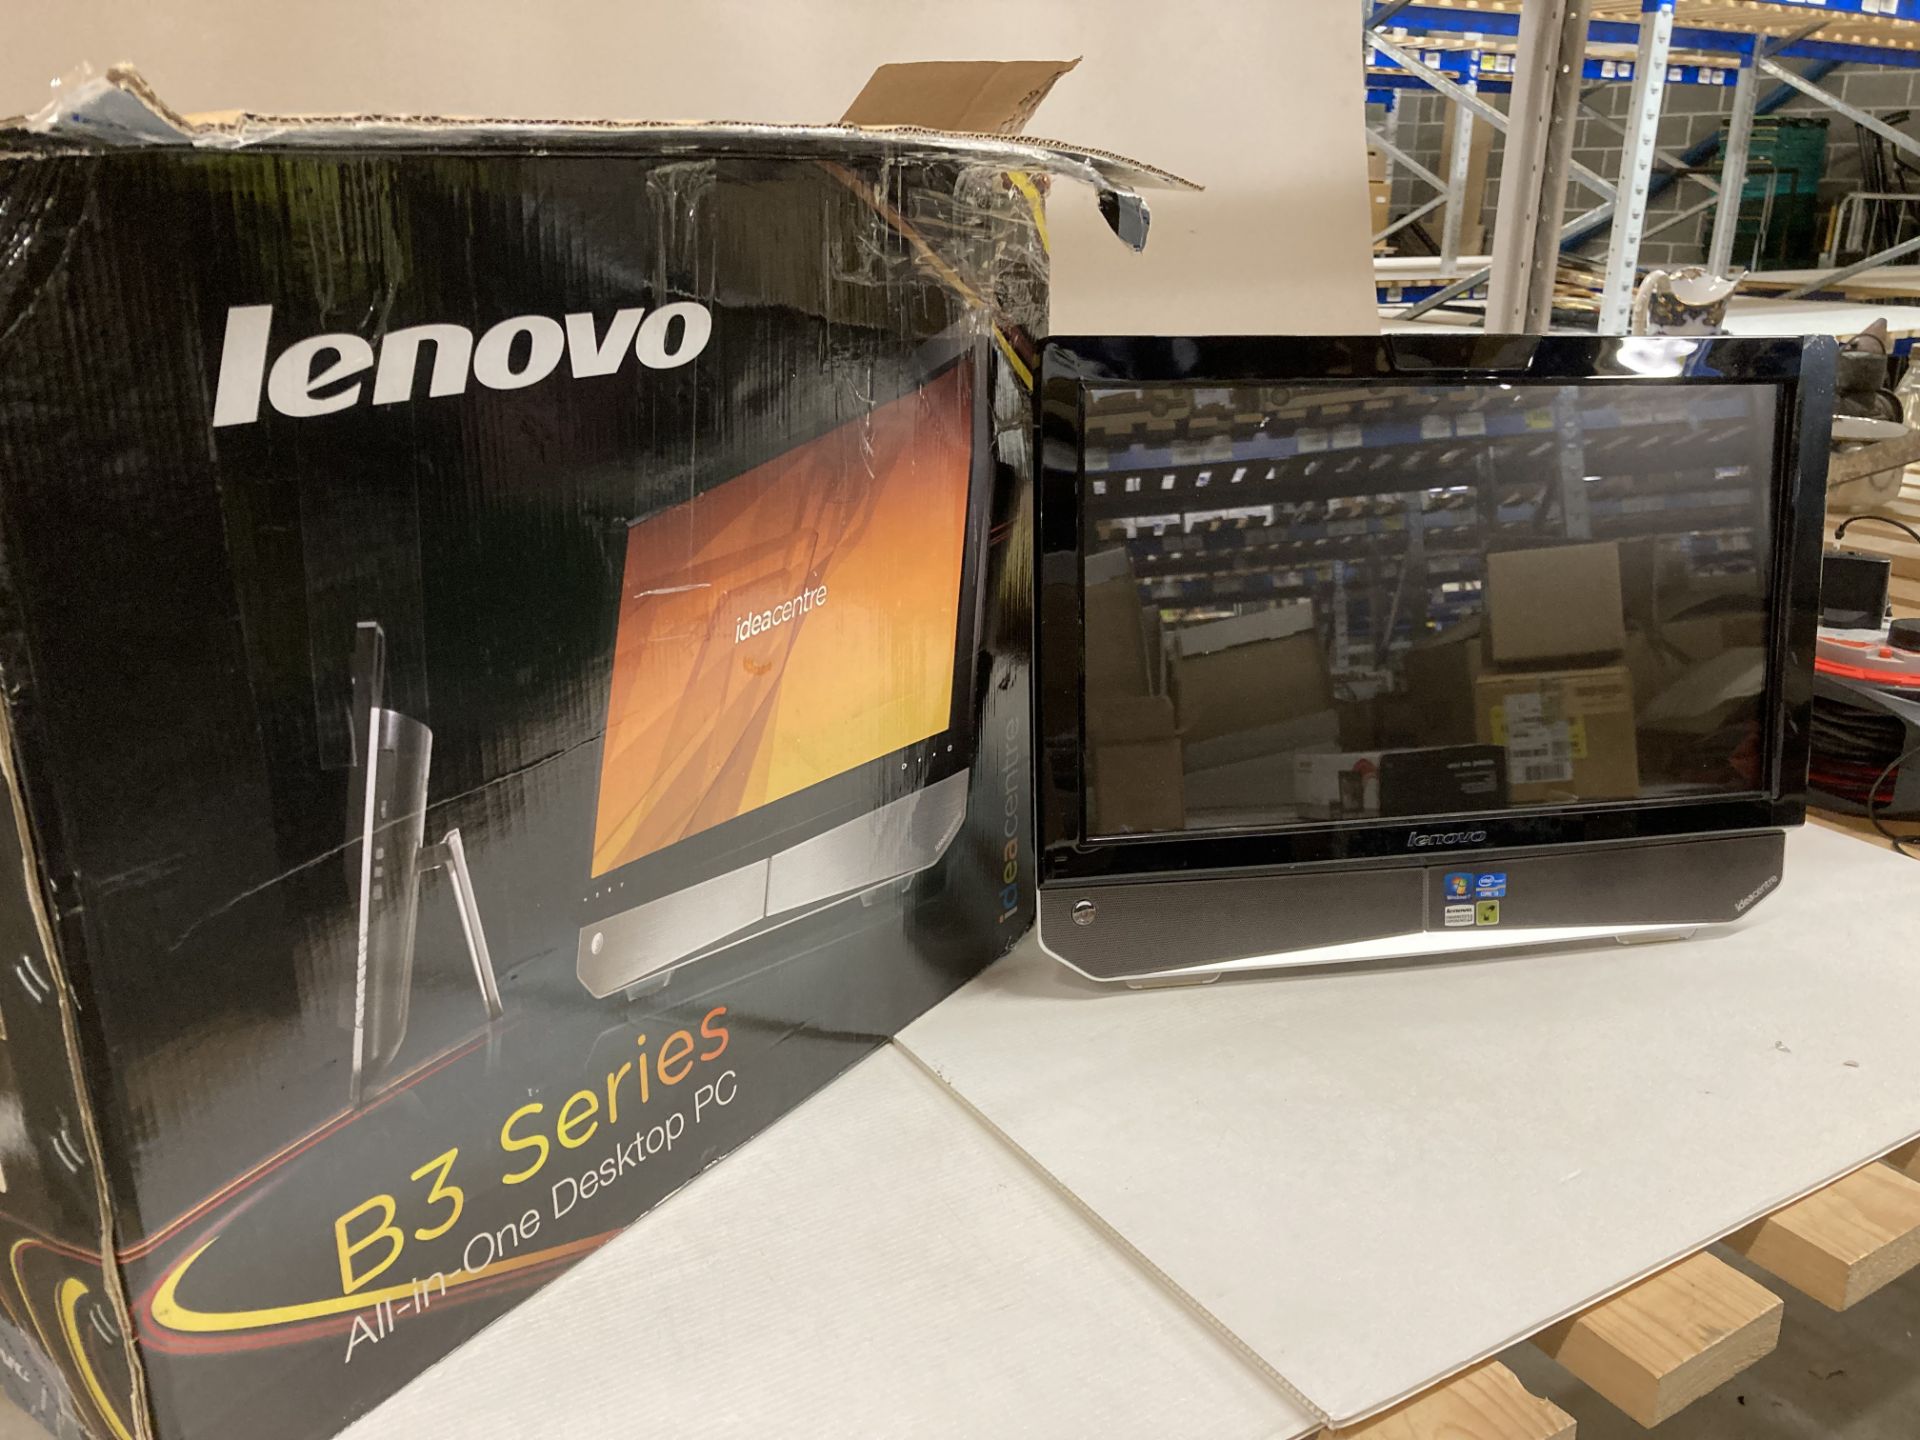 Lenovo B3 Series all-in-one computer monitor complete with power lead (saleroom location: L12